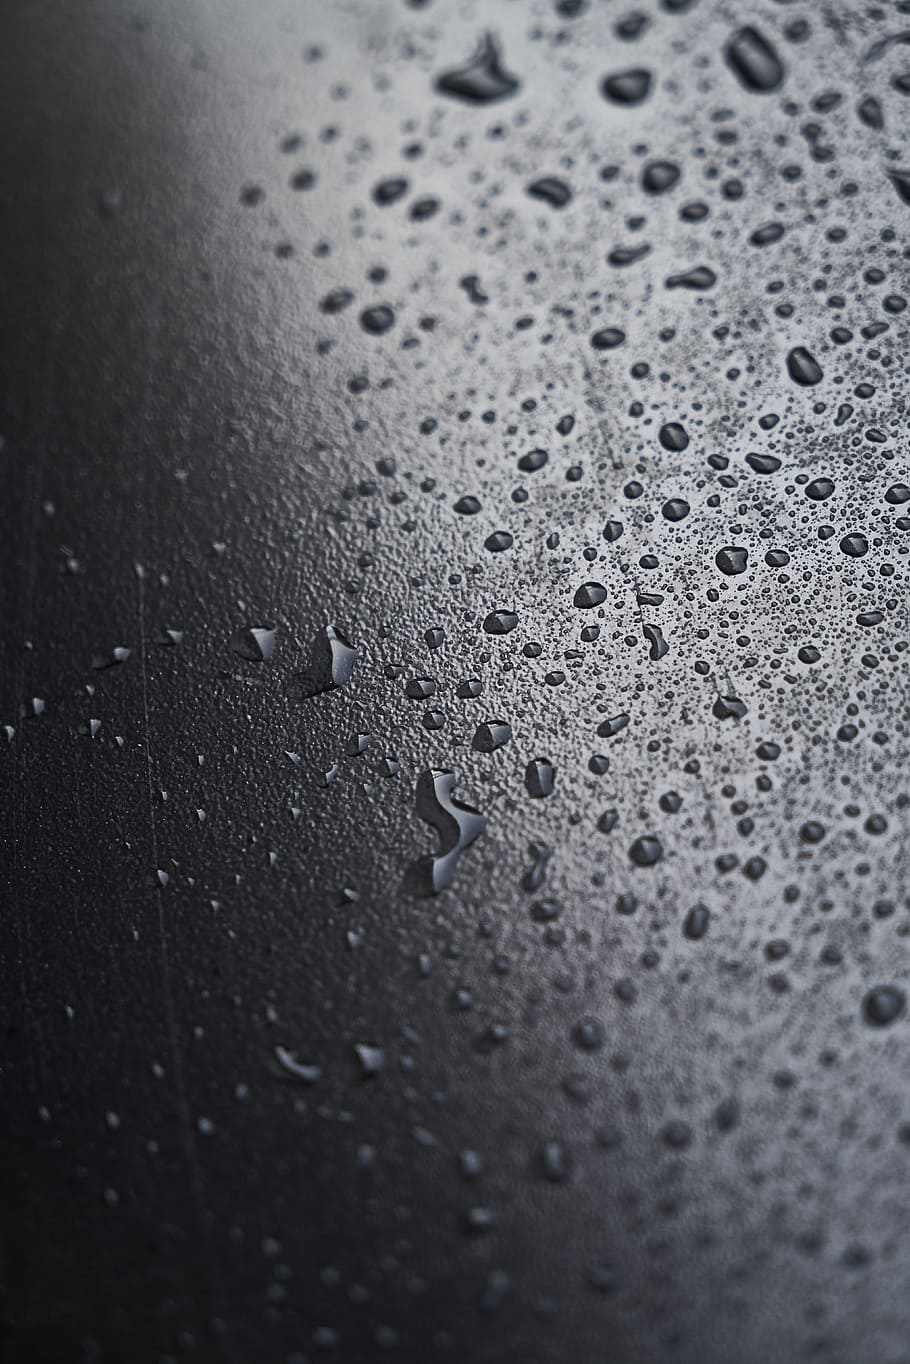 water droplets, abstract, drop, grey, smoked, black, wet, moist, surface, wallpaper